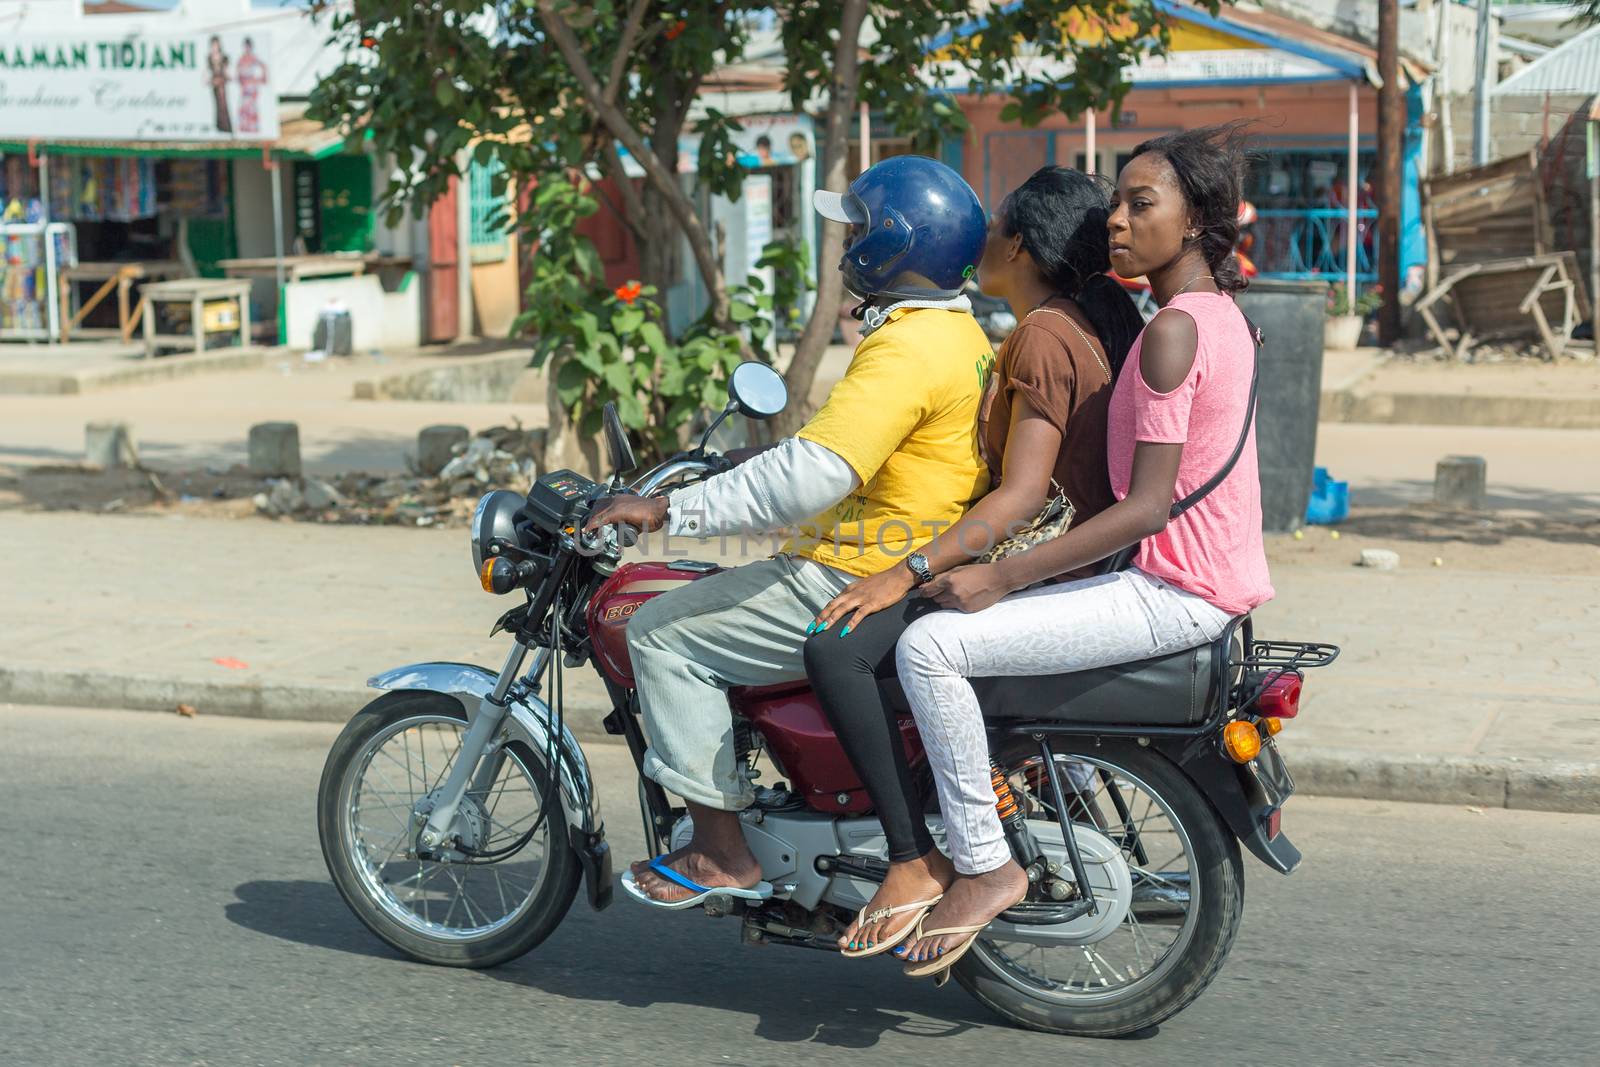 Motorcycle taxi in Benin by derejeb